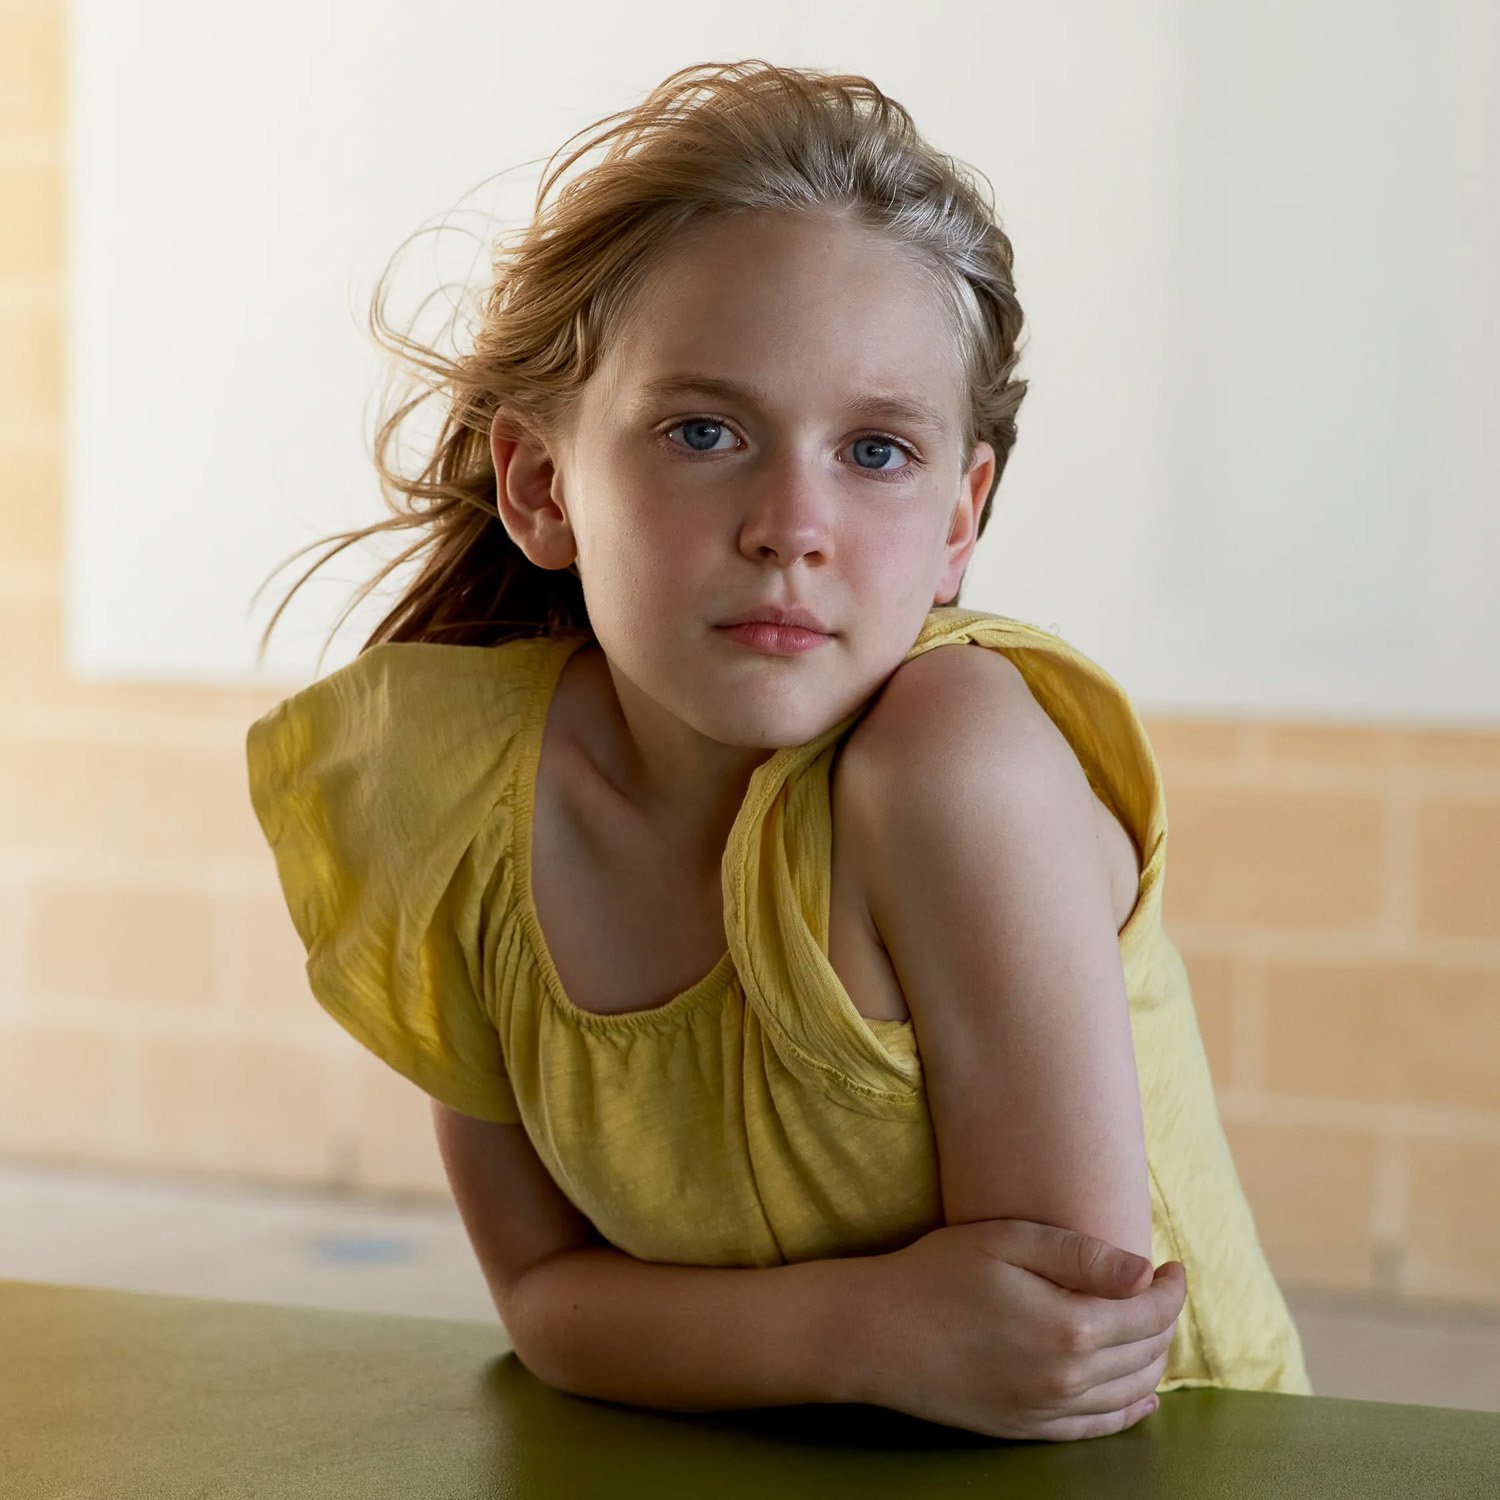 A young blonde girl in a yellow dress leaning on a table looking at camera